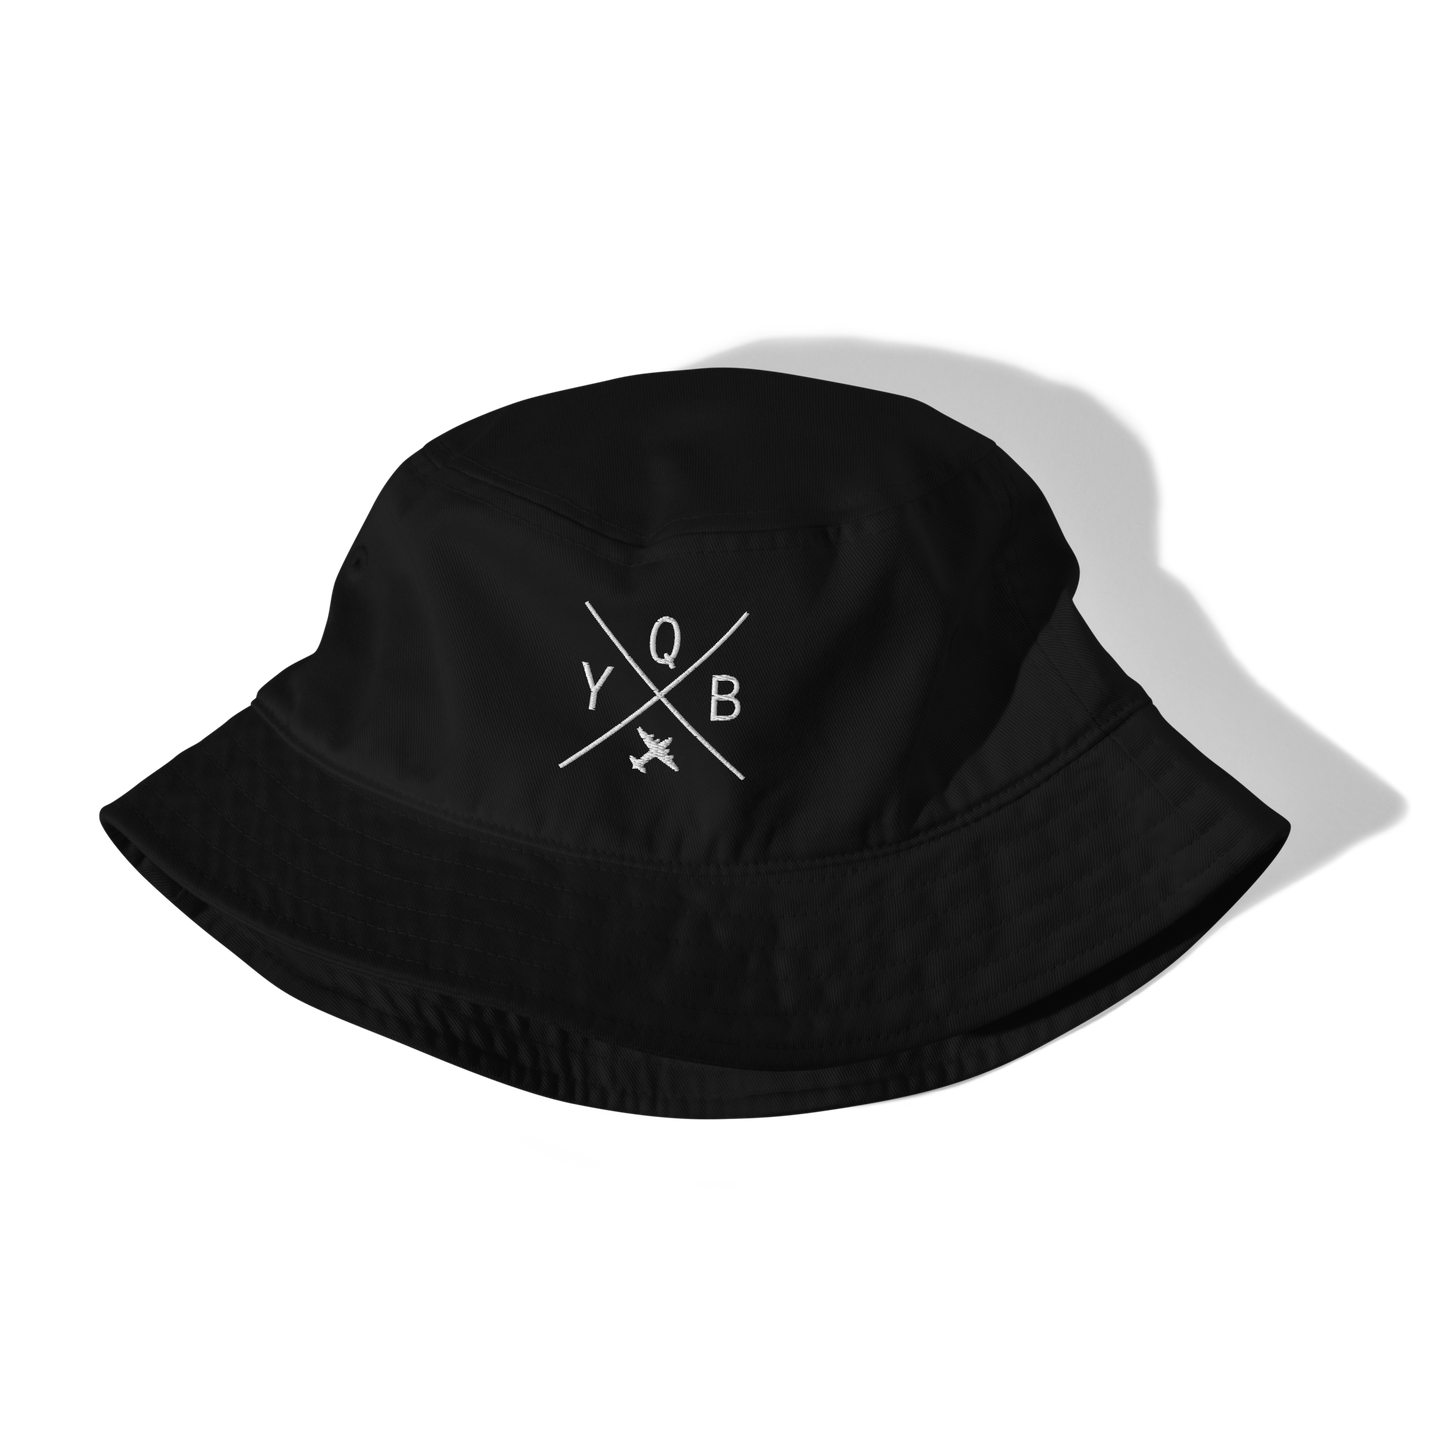 YHM Designs - YQB Quebec City Organic Cotton Bucket Hat - Crossed-X Design with Airport Code and Vintage Propliner - White Embroidery - Image 02